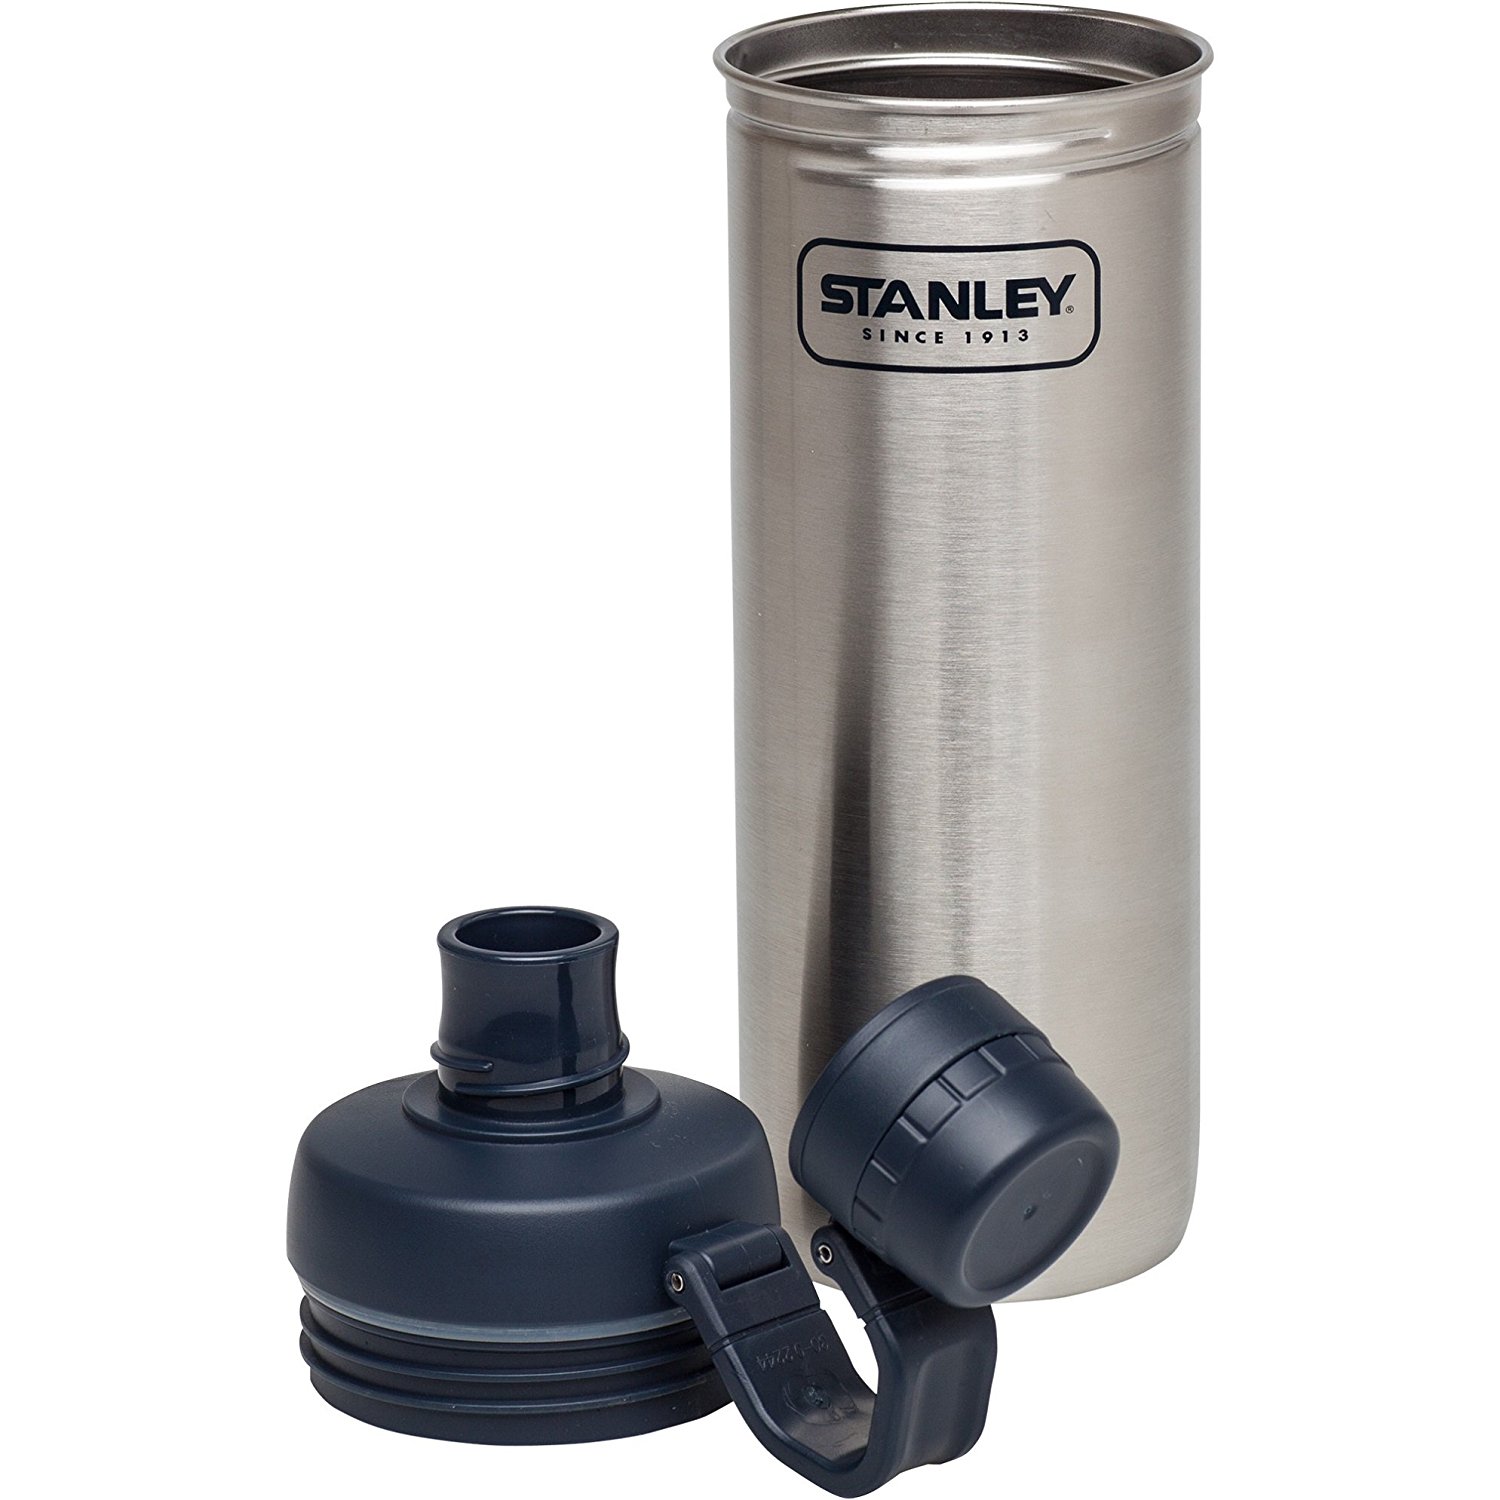 Stanley stainless steel adventure 27oz water bottle for $7.50